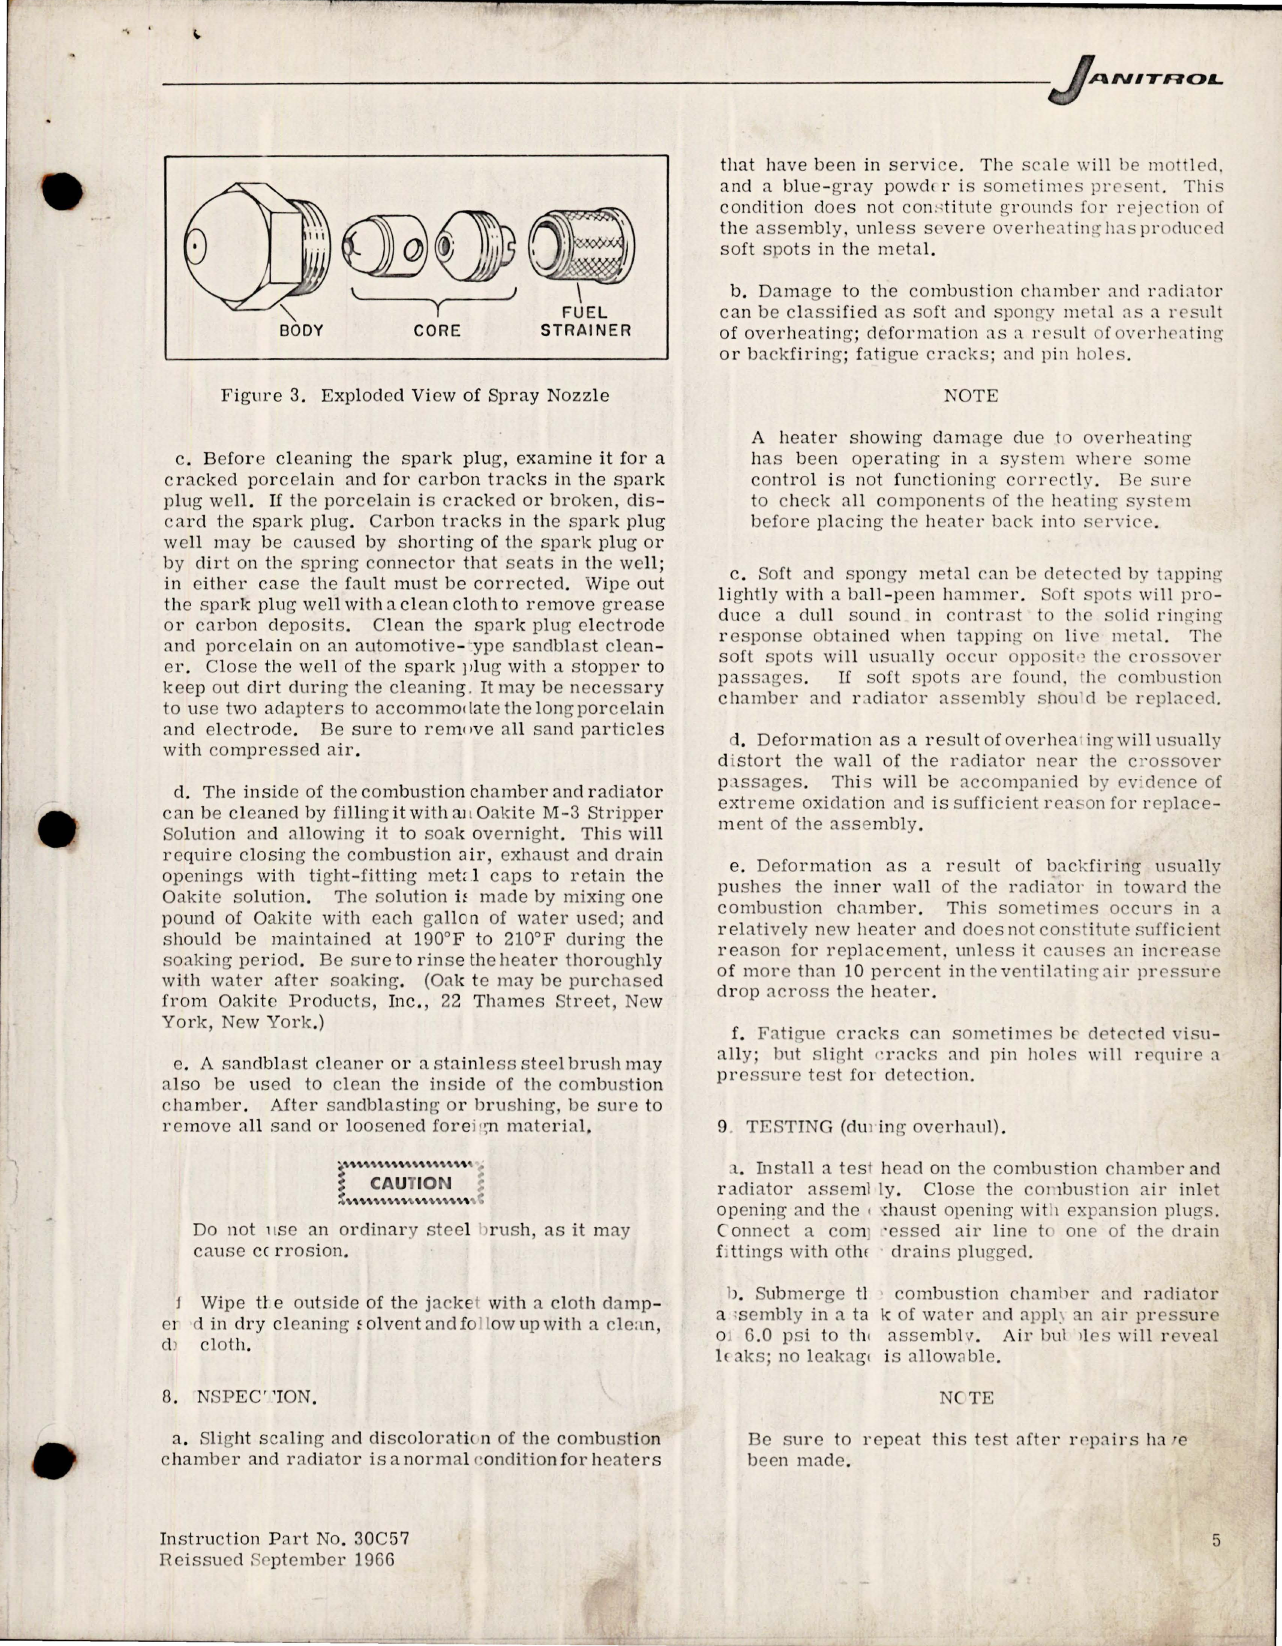 Sample page 5 from AirCorps Library document: Maintenance Instructions for Aircraft Heaters - Parts C83A28, D83A28, E83A28 and F83A28 - Type S-50